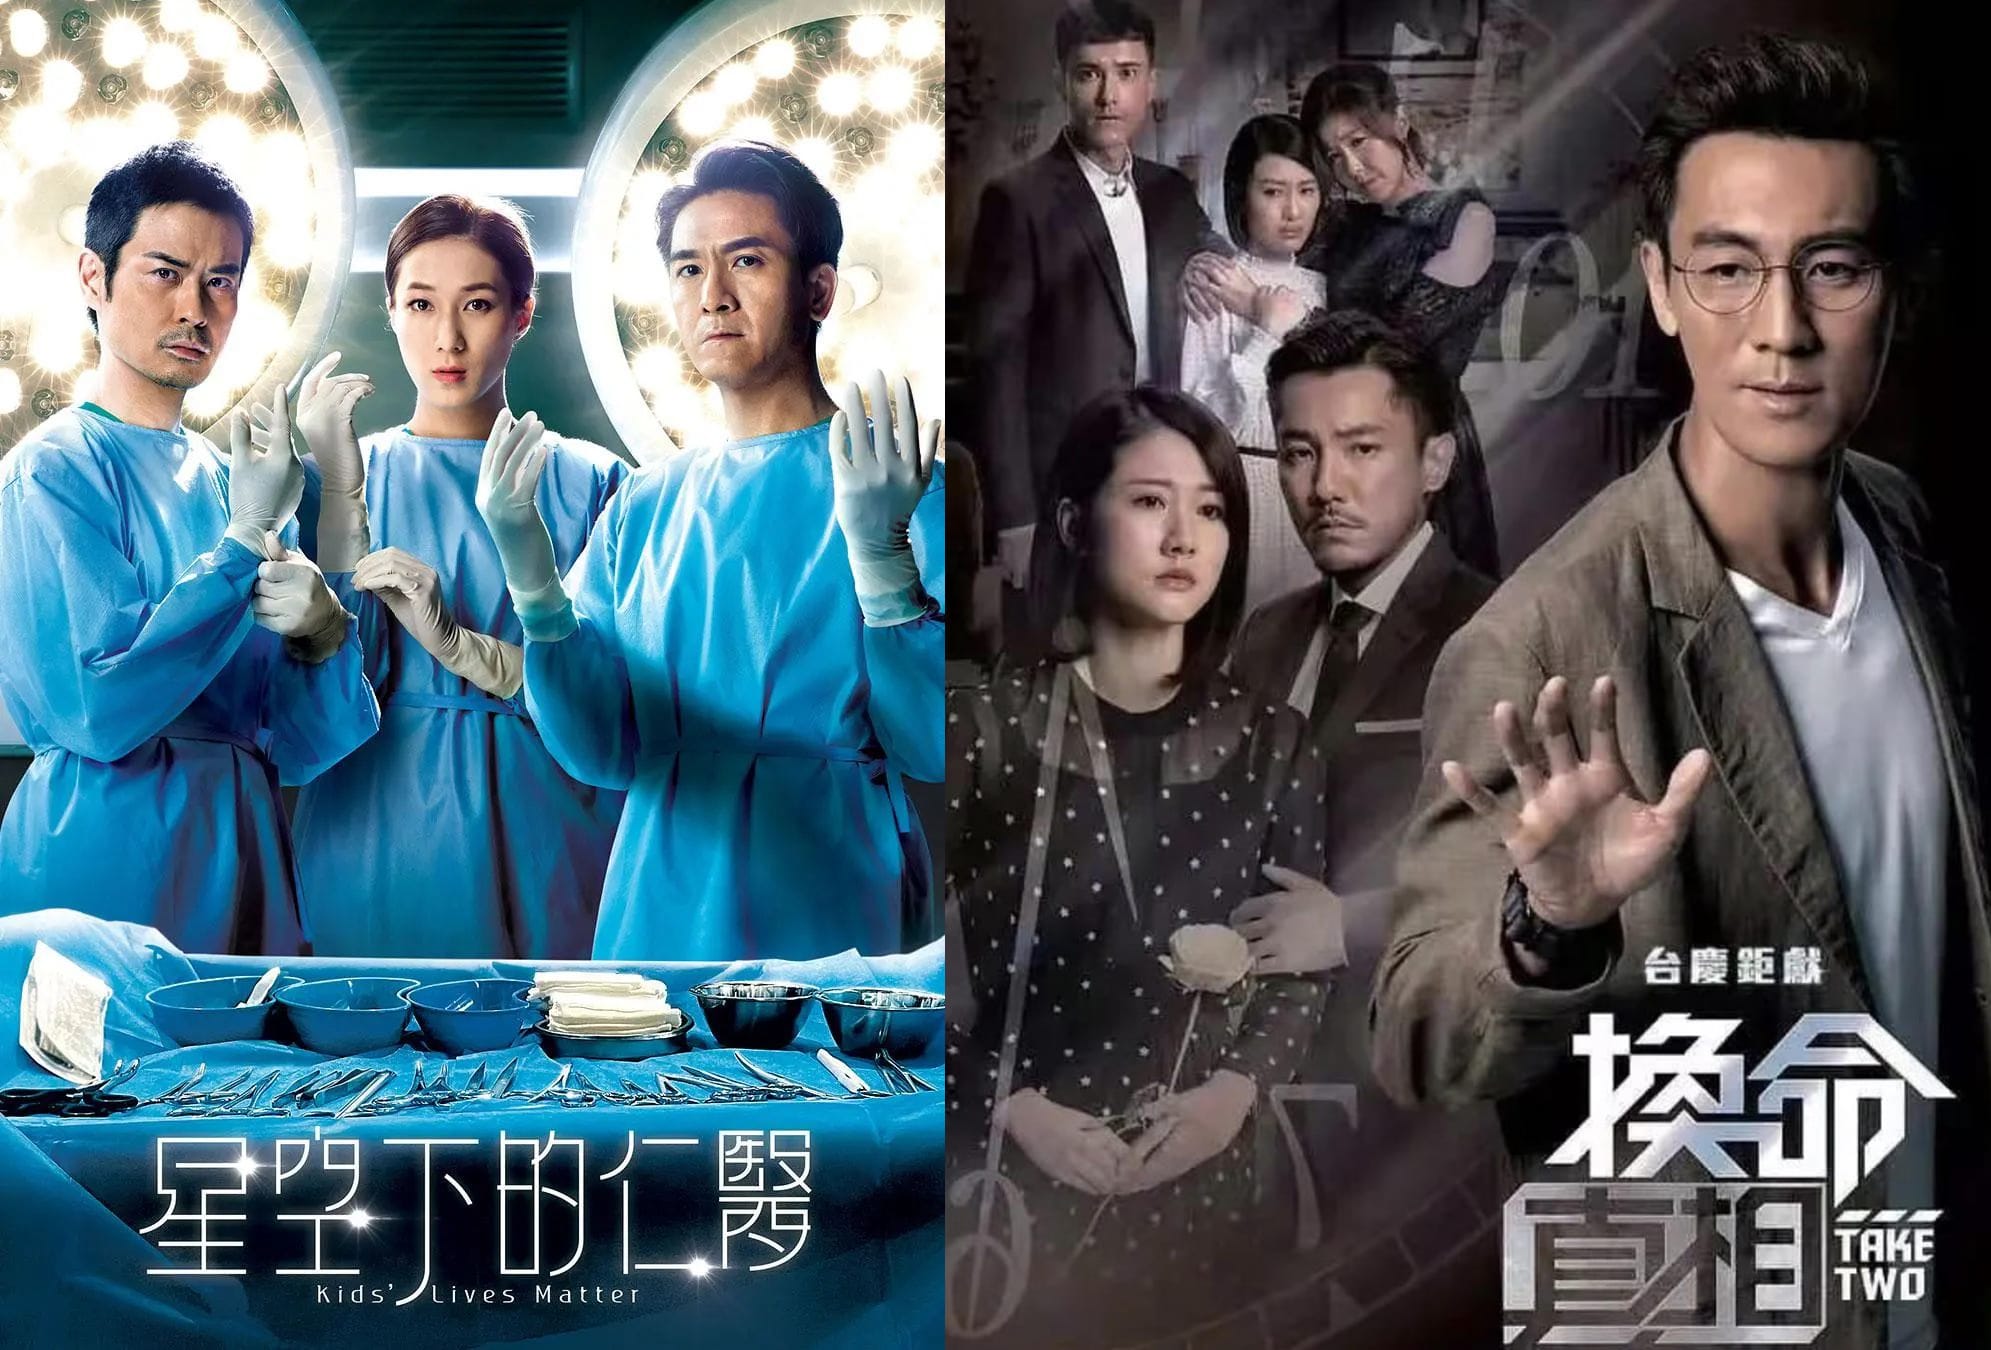 Kevin Cheng & Linda Chung'S Comeback Tvb Drama Kids' Lives Matter Met With  Disappointing Ratings - 8Days